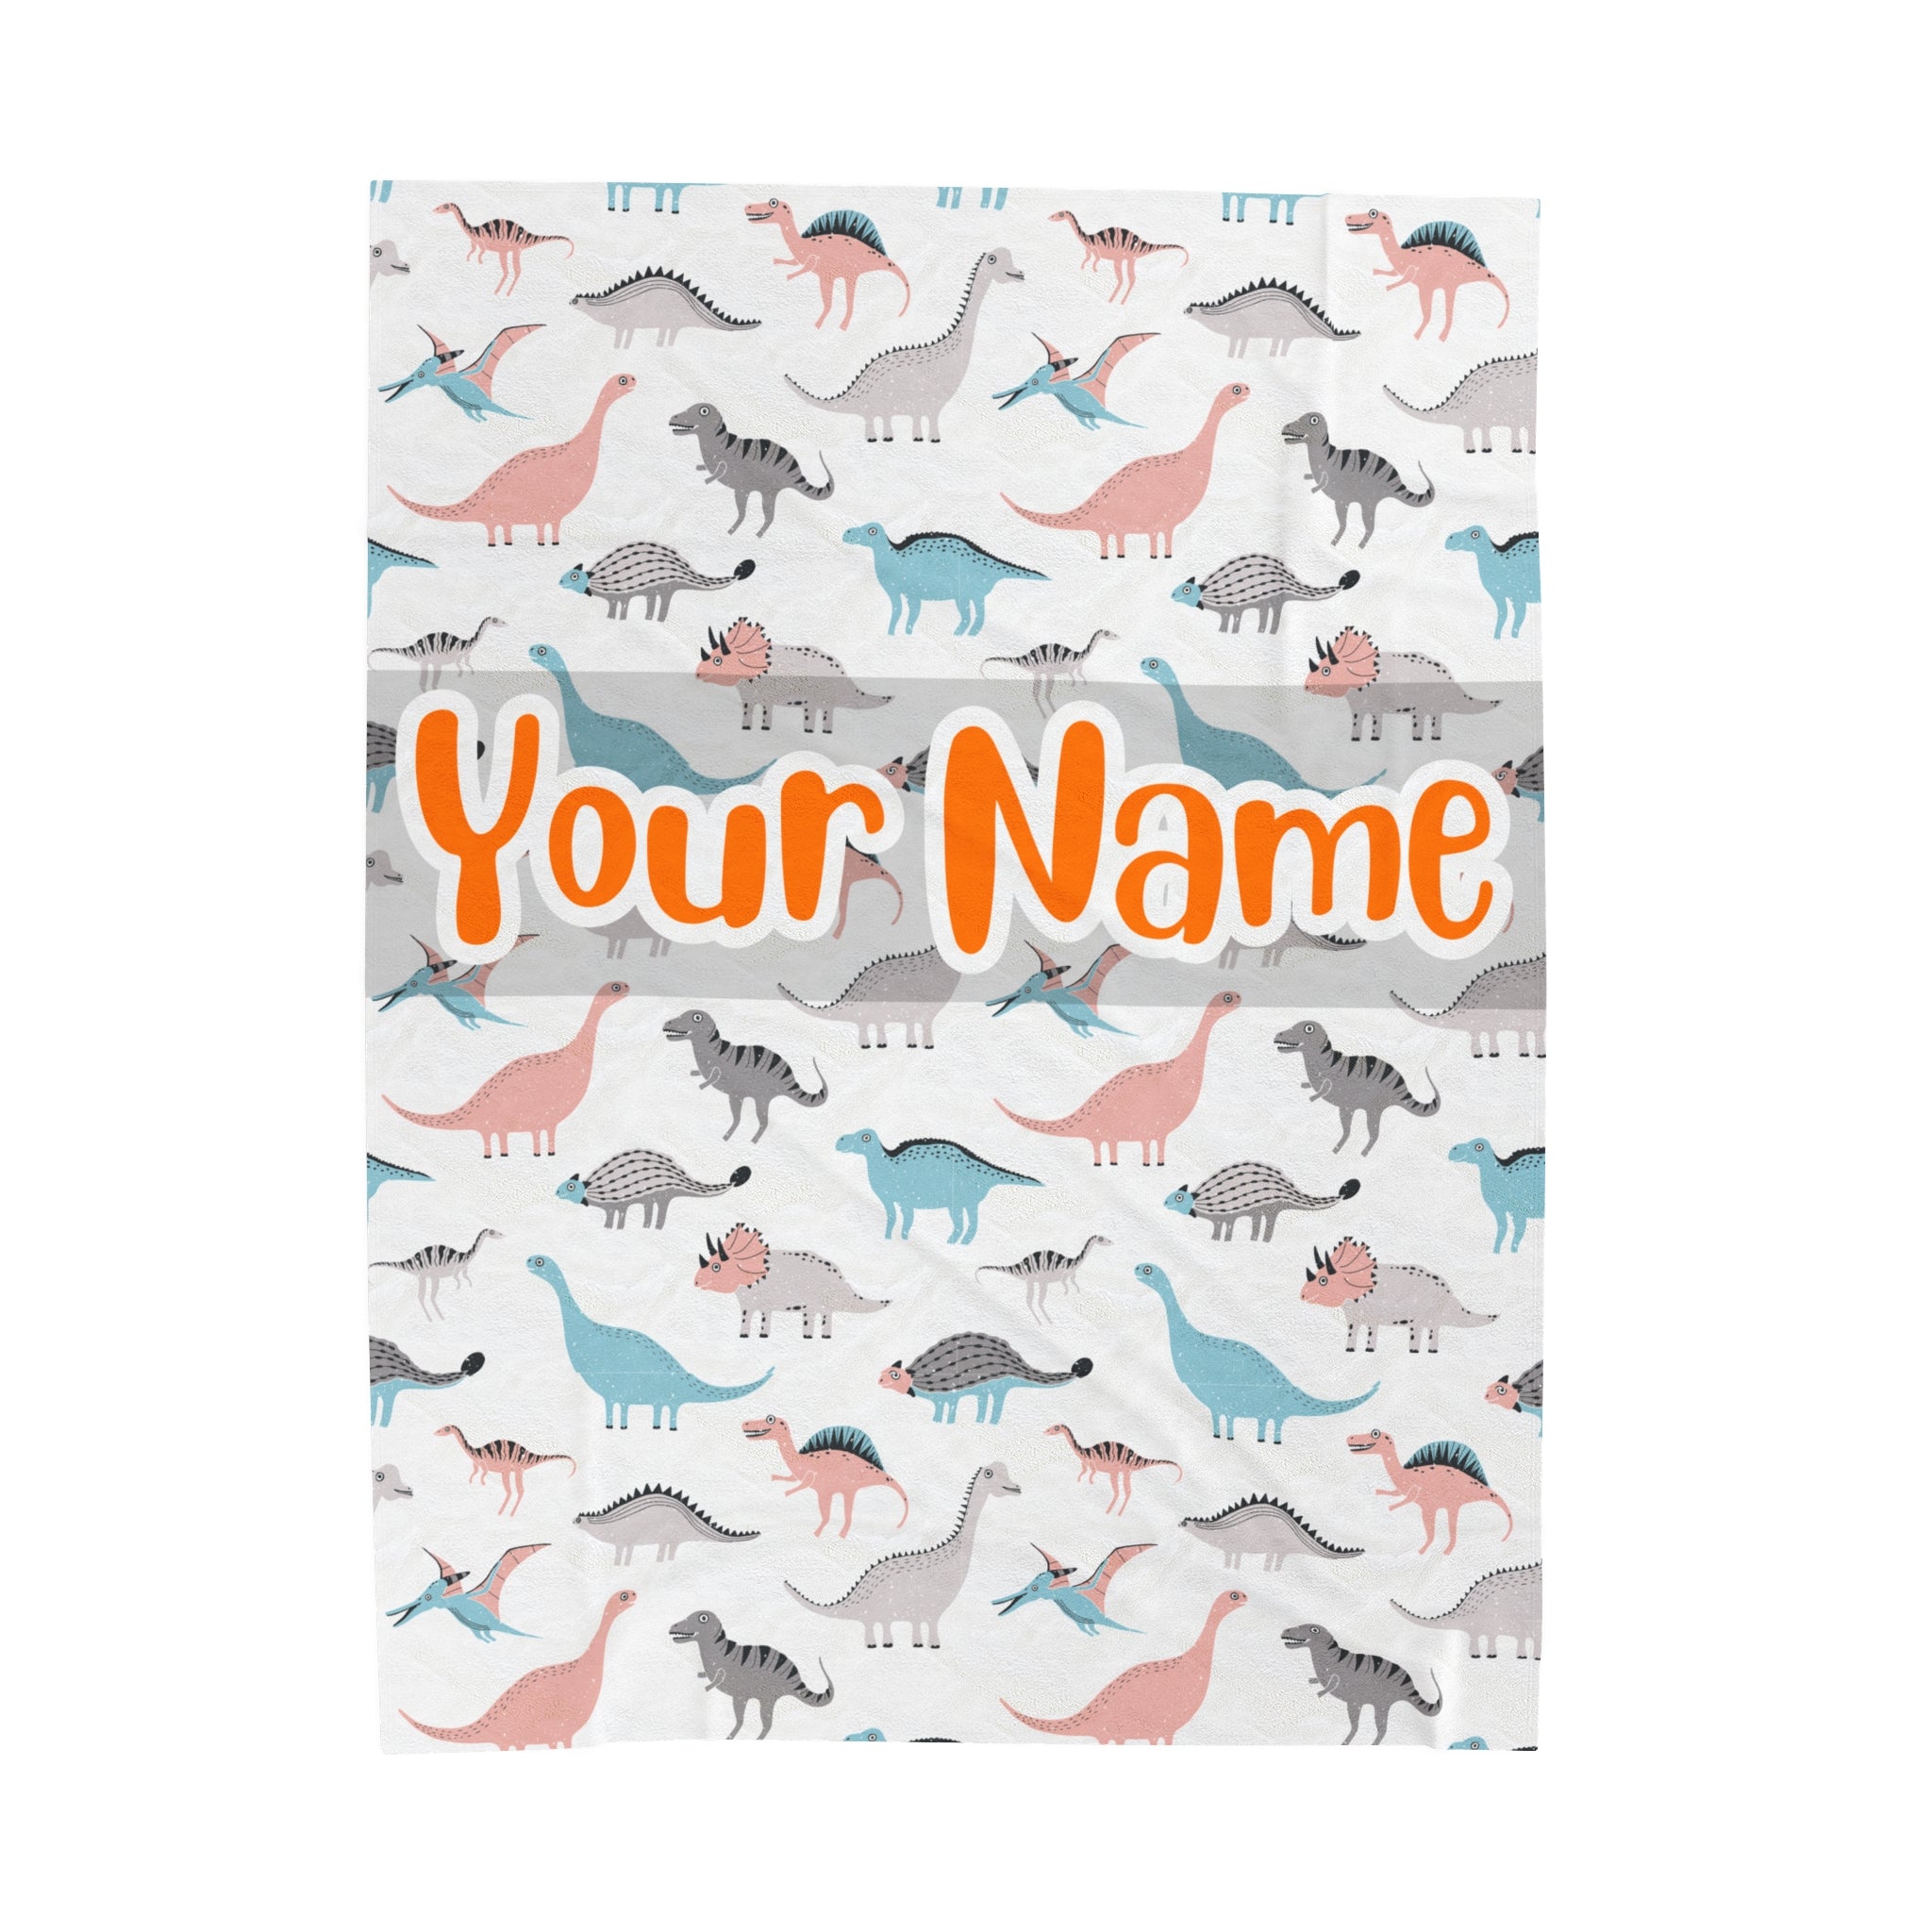 Cute Dinosaur Collections Blanket #5 Custom Blanket with Name - Personalized Blanket